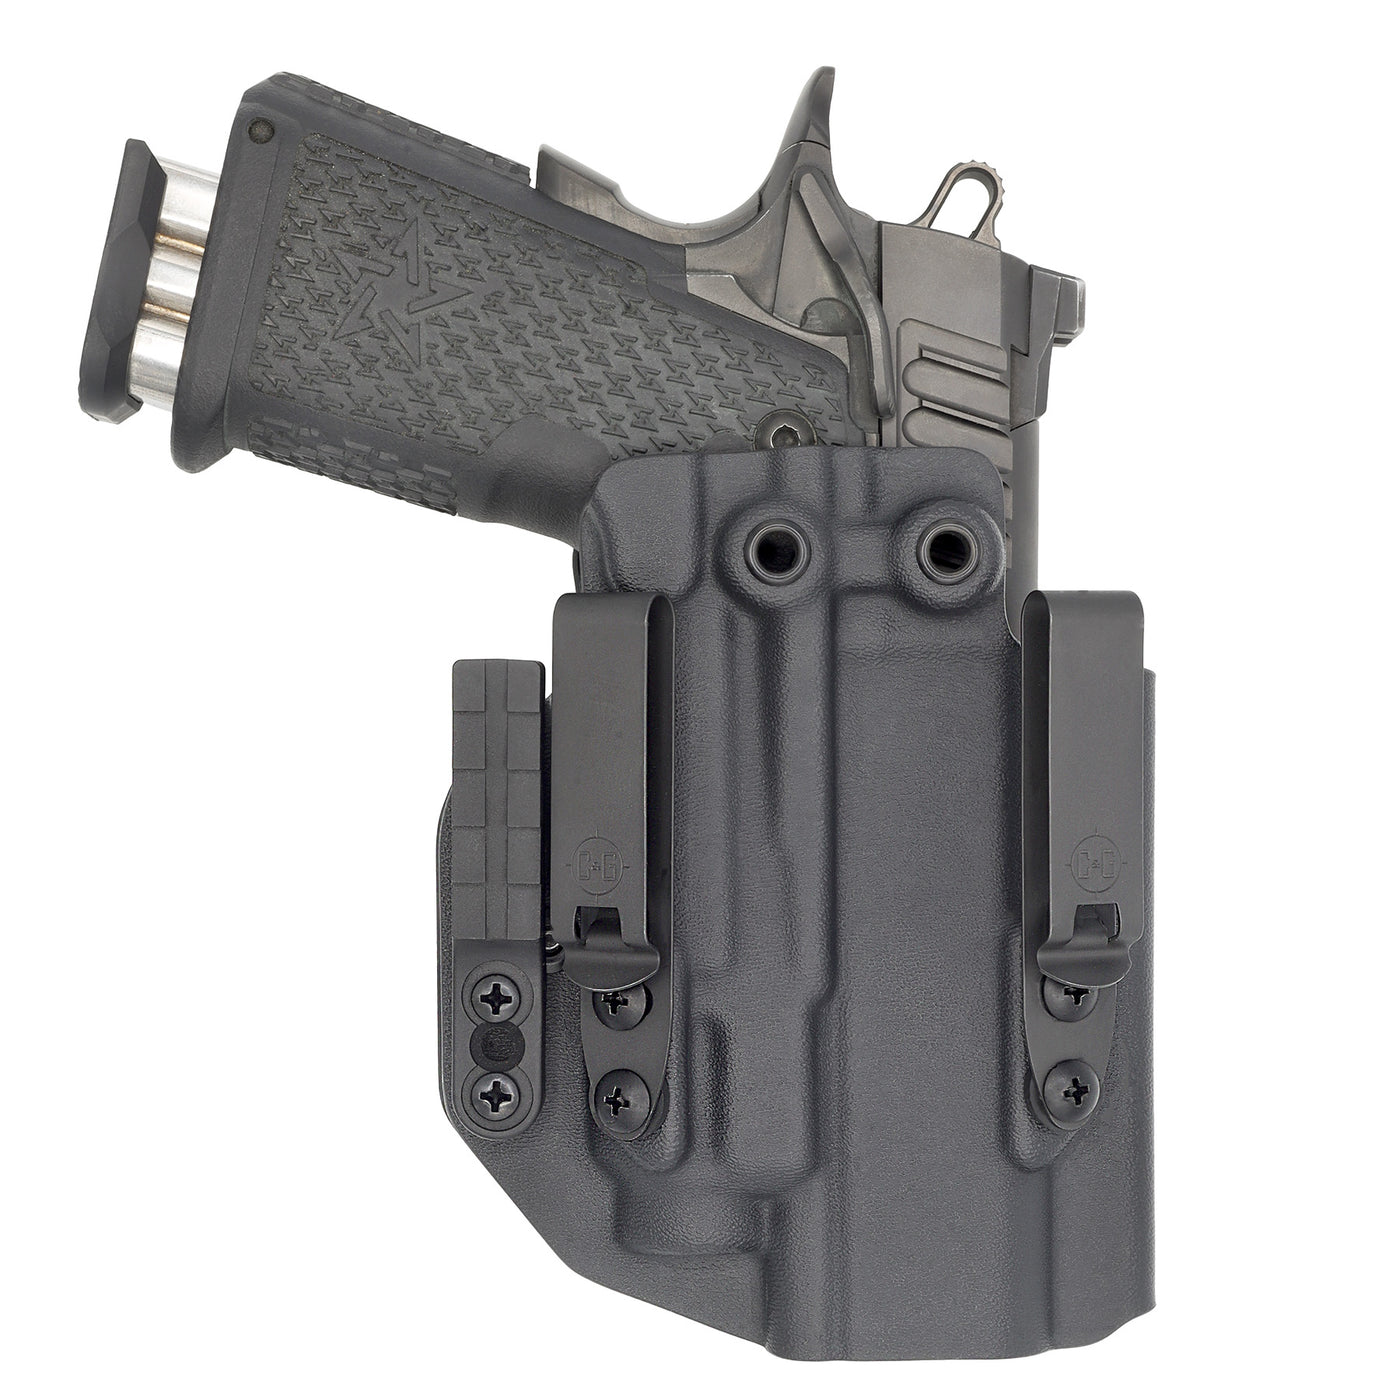 C&G Holsters custom IWB ALPHA UPGRADE Tactical 2011 Streamlight TLR7/a in holstered position